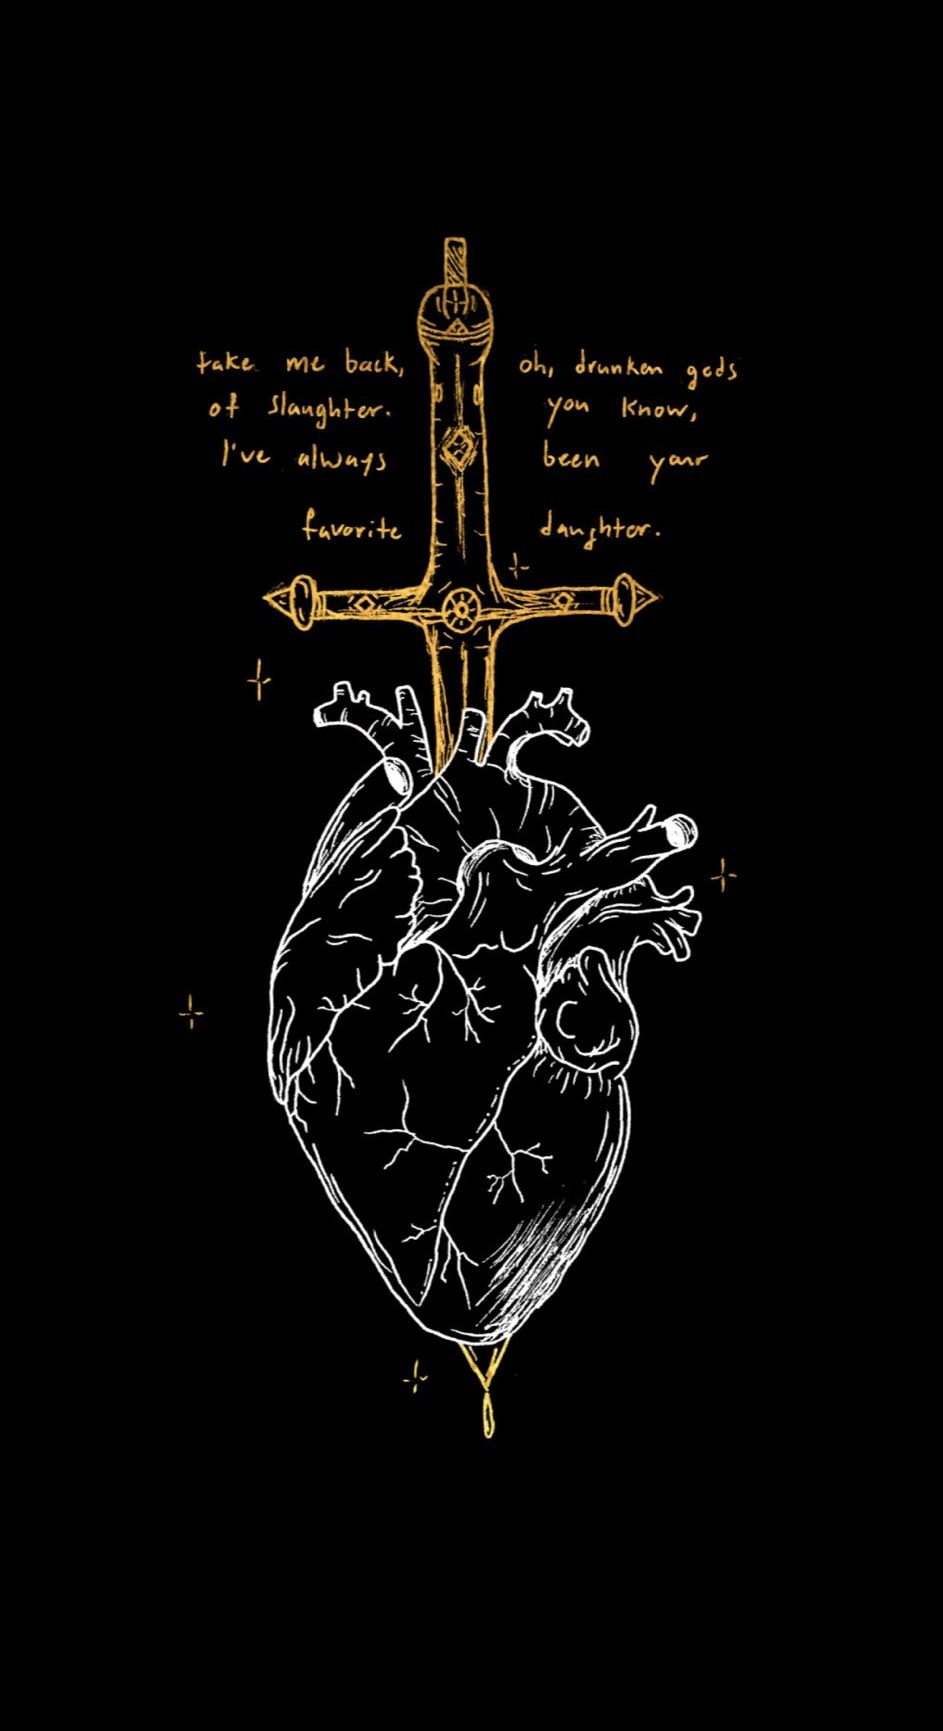 IPhone wallpaper of a heart with a sword through it - Black, May, black heart